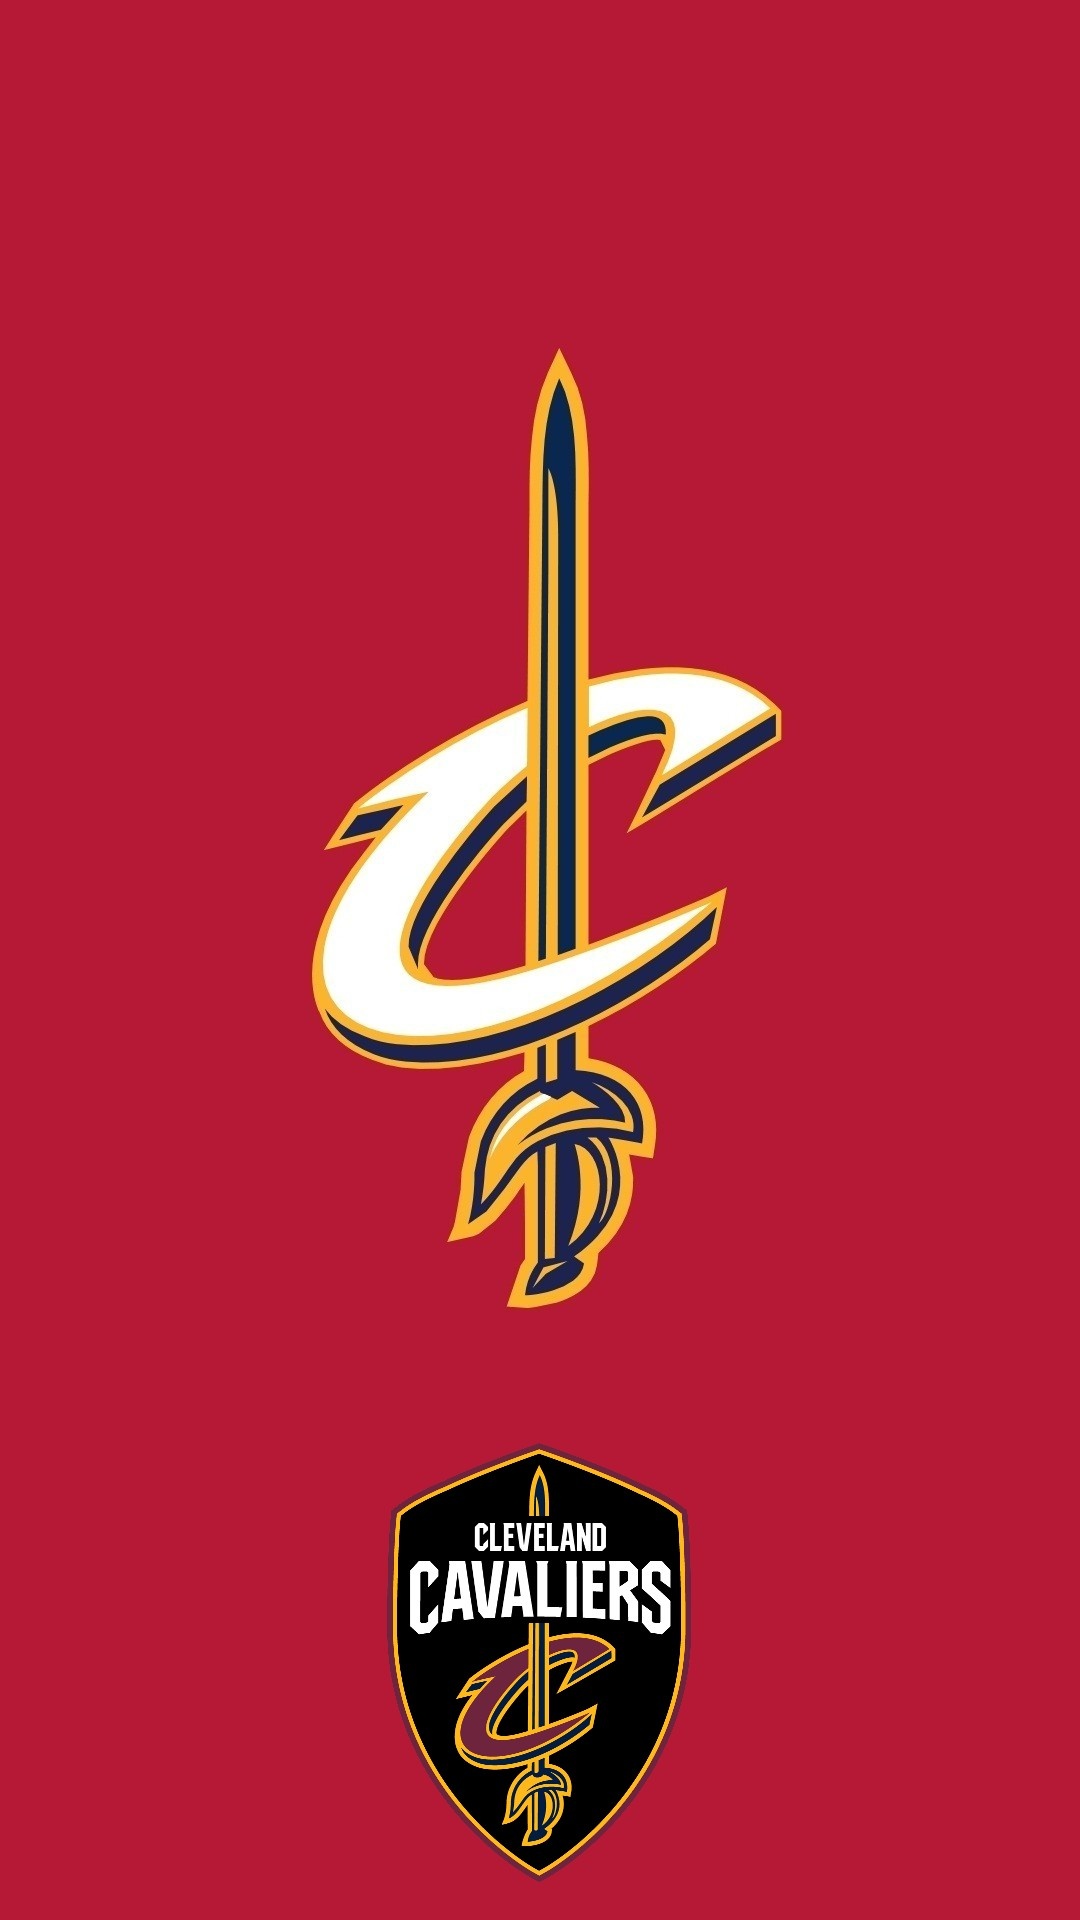 Cleveland Cavaliers: The team finished the 2002–03 season with the worst record in the NBA. 1080x1920 Full HD Wallpaper.